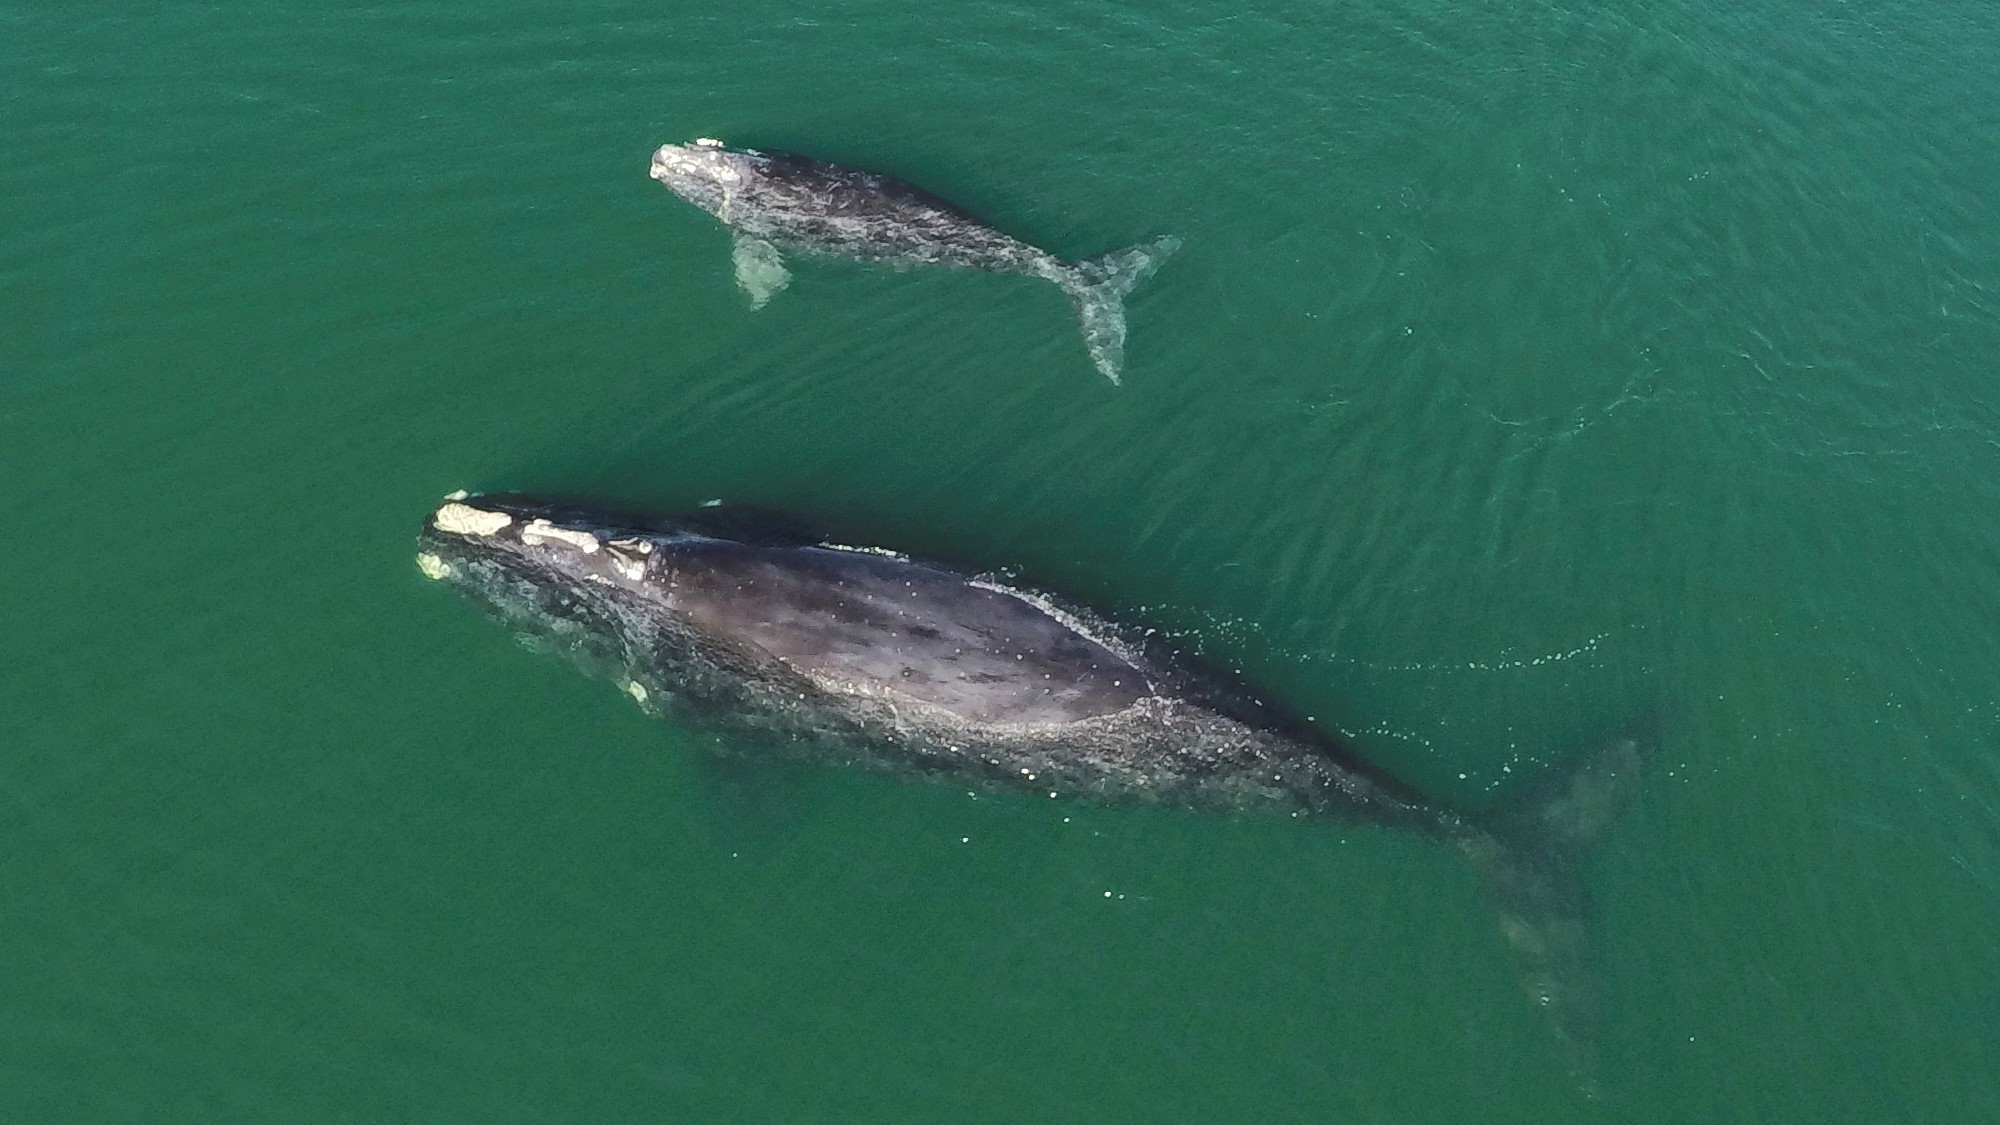 A North Atlantic right whale mother and calf swim off the coast of Georgia.